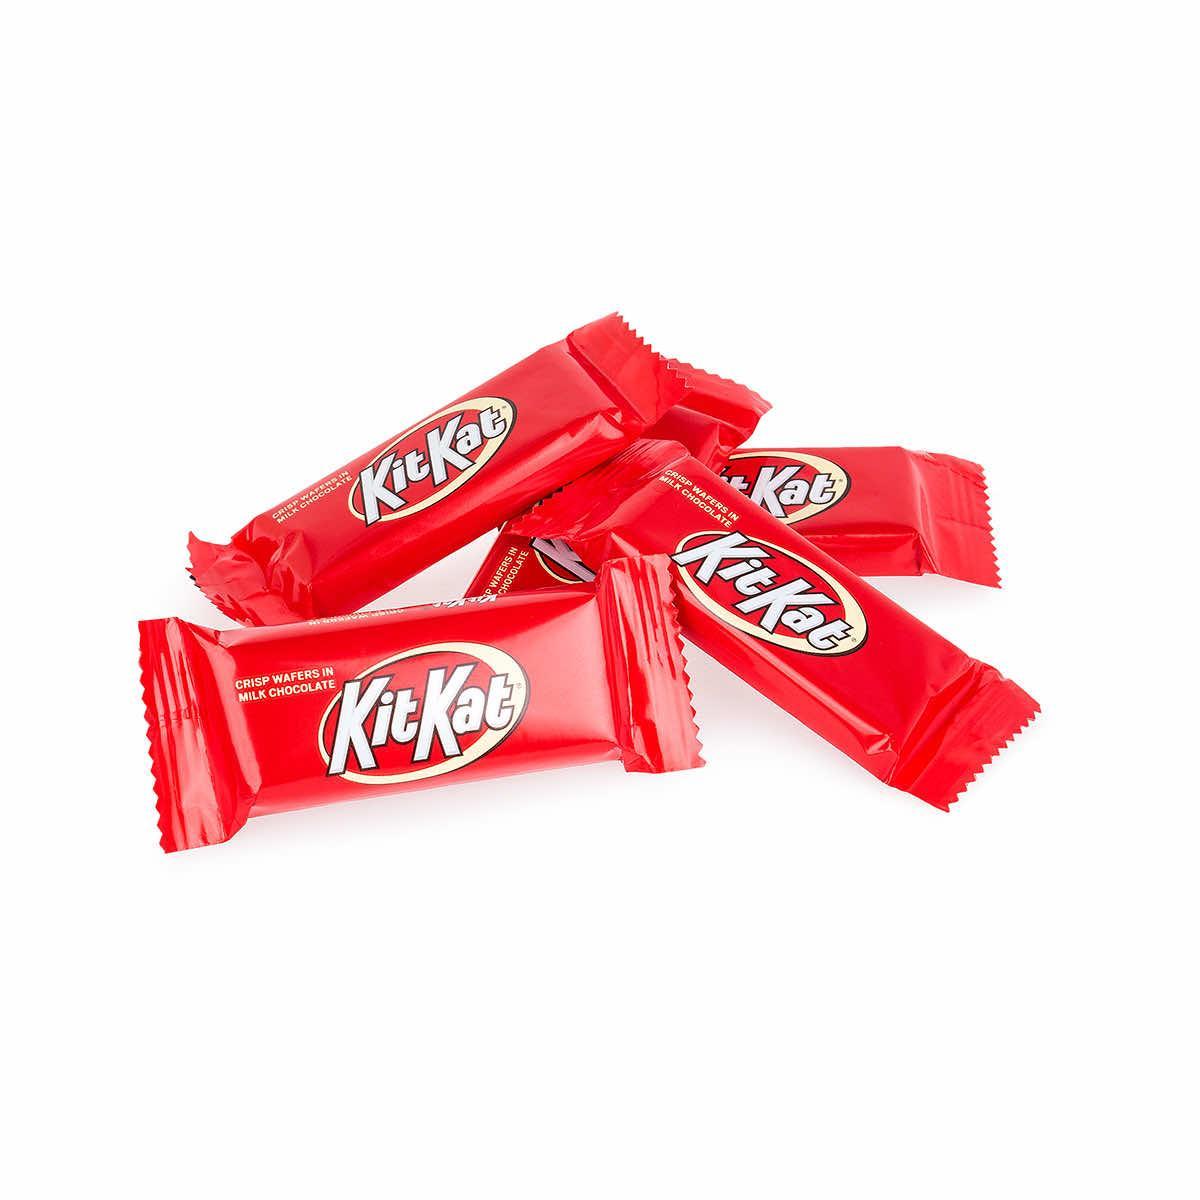 KitKat Bites Are Going To Change The Snack Game